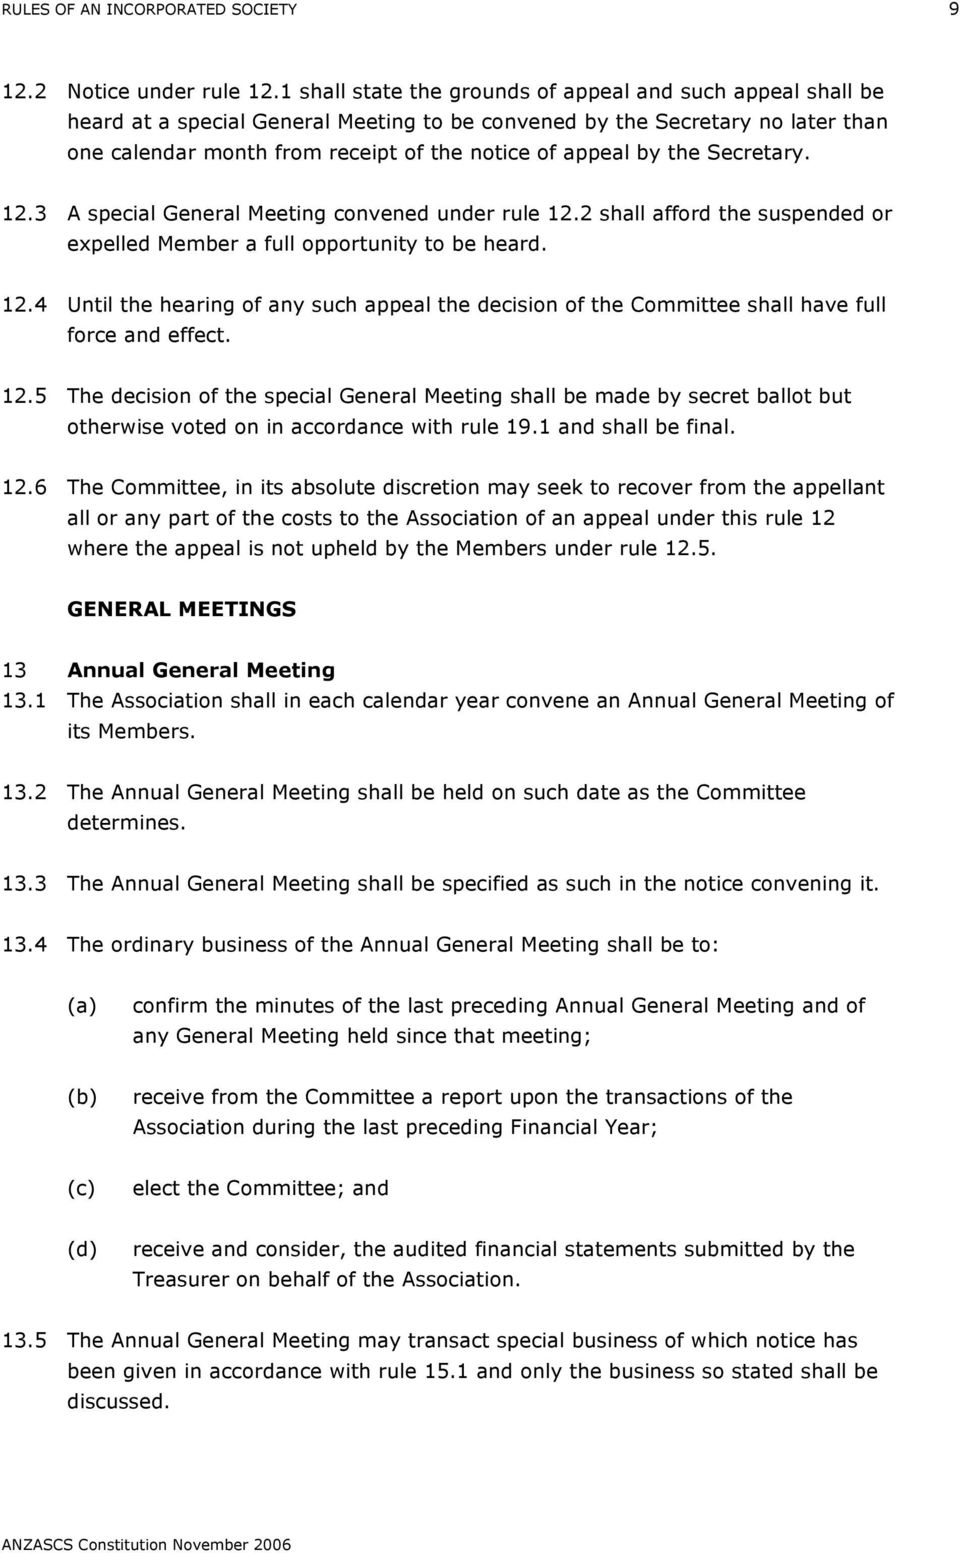 by the Secretary. 12.3 A special General Meeting convened under rule 12.2 shall afford the suspended or expelled Member a full opportunity to be heard. 12.4 Until the hearing of any such appeal the decision of the Committee shall have full force and effect.